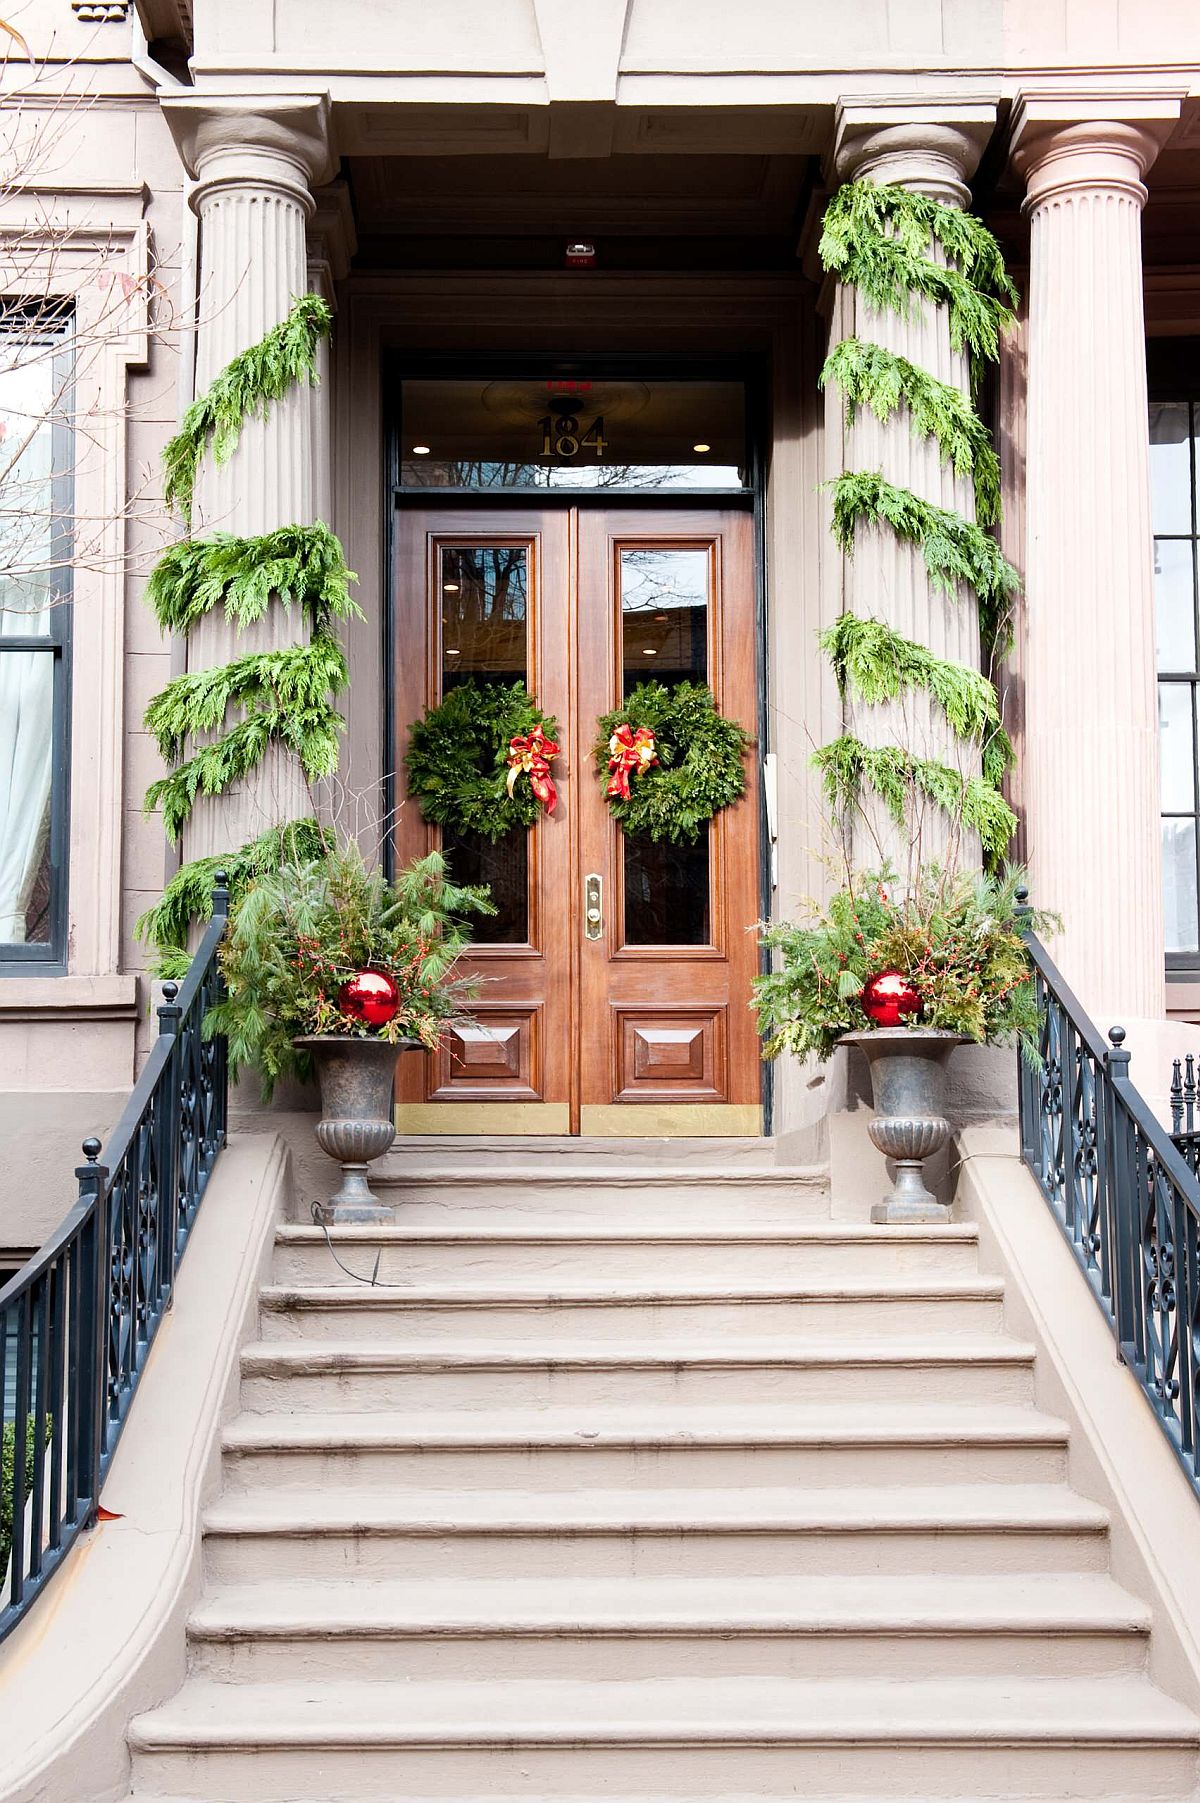 Simple-and-elegant-evergreen-wreaths-and-garlands-can-turn-the-entryway-into-an-absolute-showstopper-58517